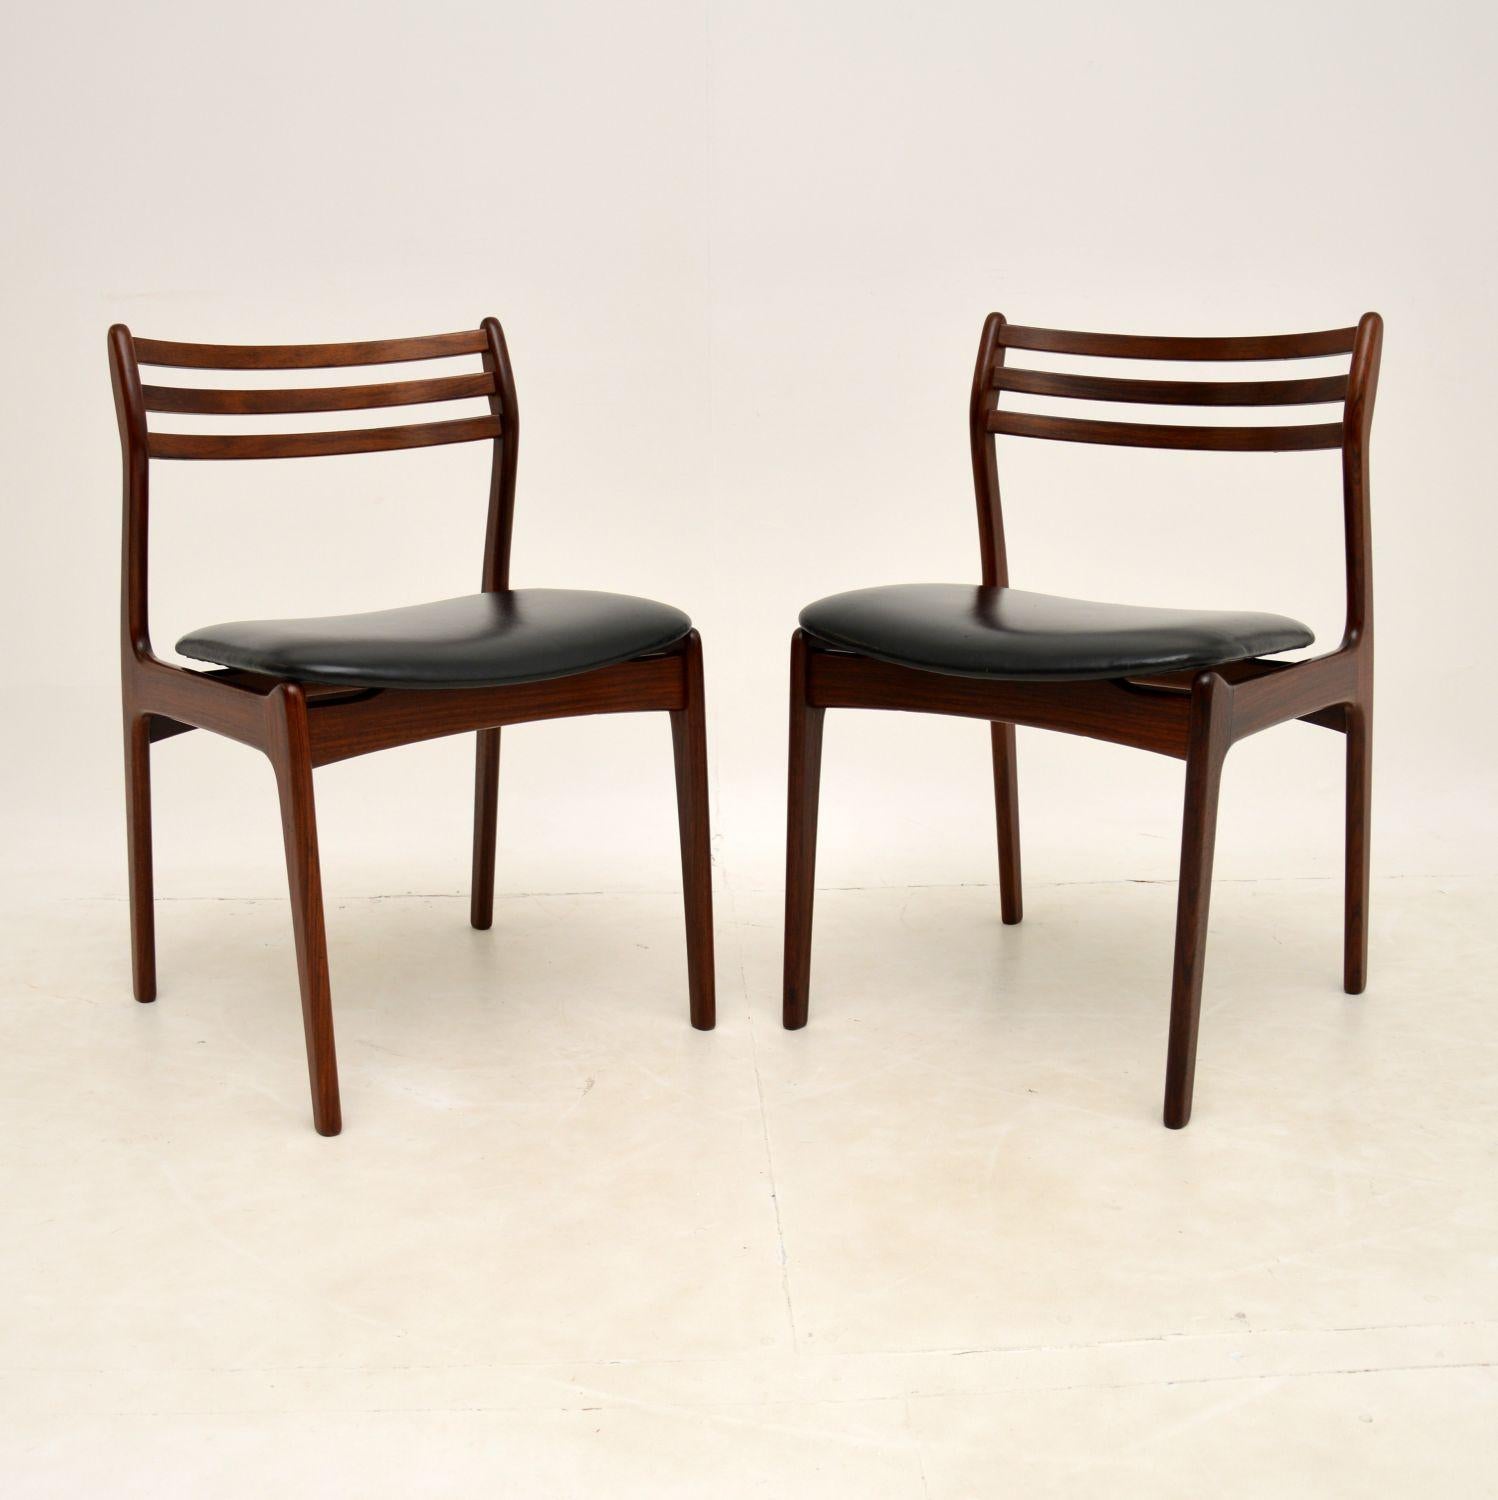 A stunning pair of Danish vintage solid wood chairs with black leather seats. These were designed by P.E. Jørgensen for Farso Stolefabrik, they date from the 1960’s.

The design is beautiful, these are dining chairs but can also be used anywhere